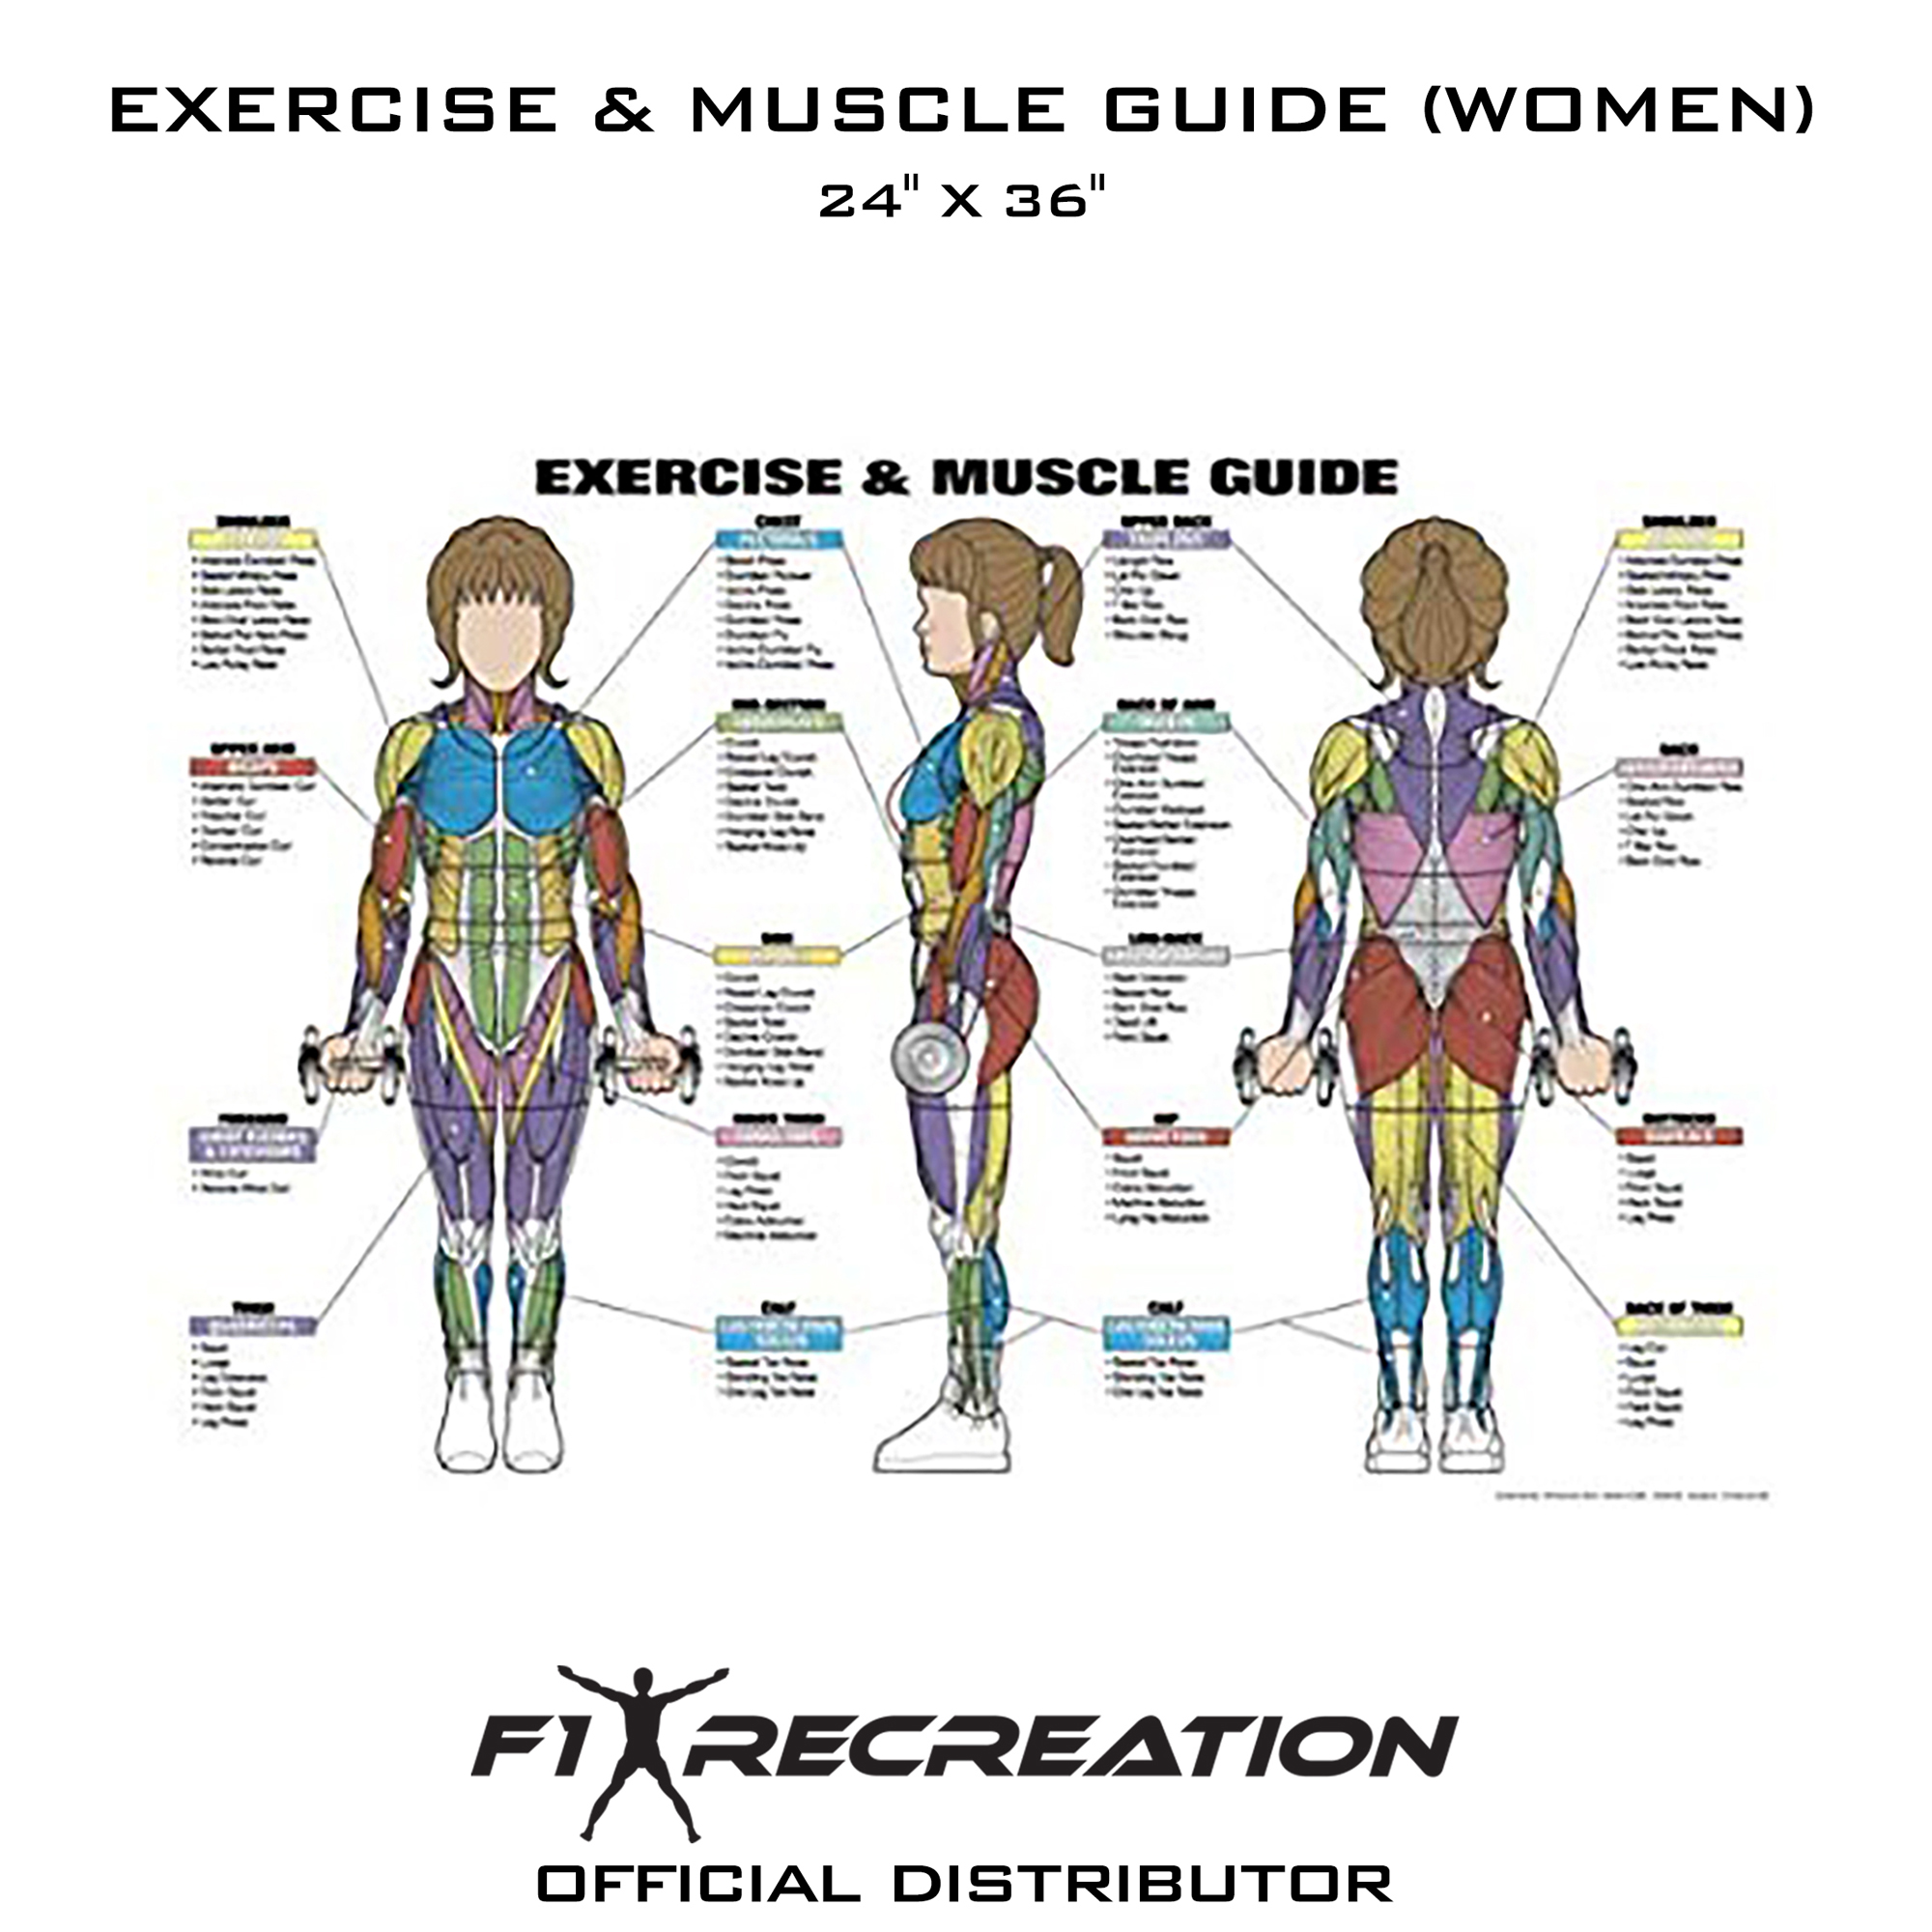 F1 Recreation Original Exercise And Muscle Guide Fitness Chart Women